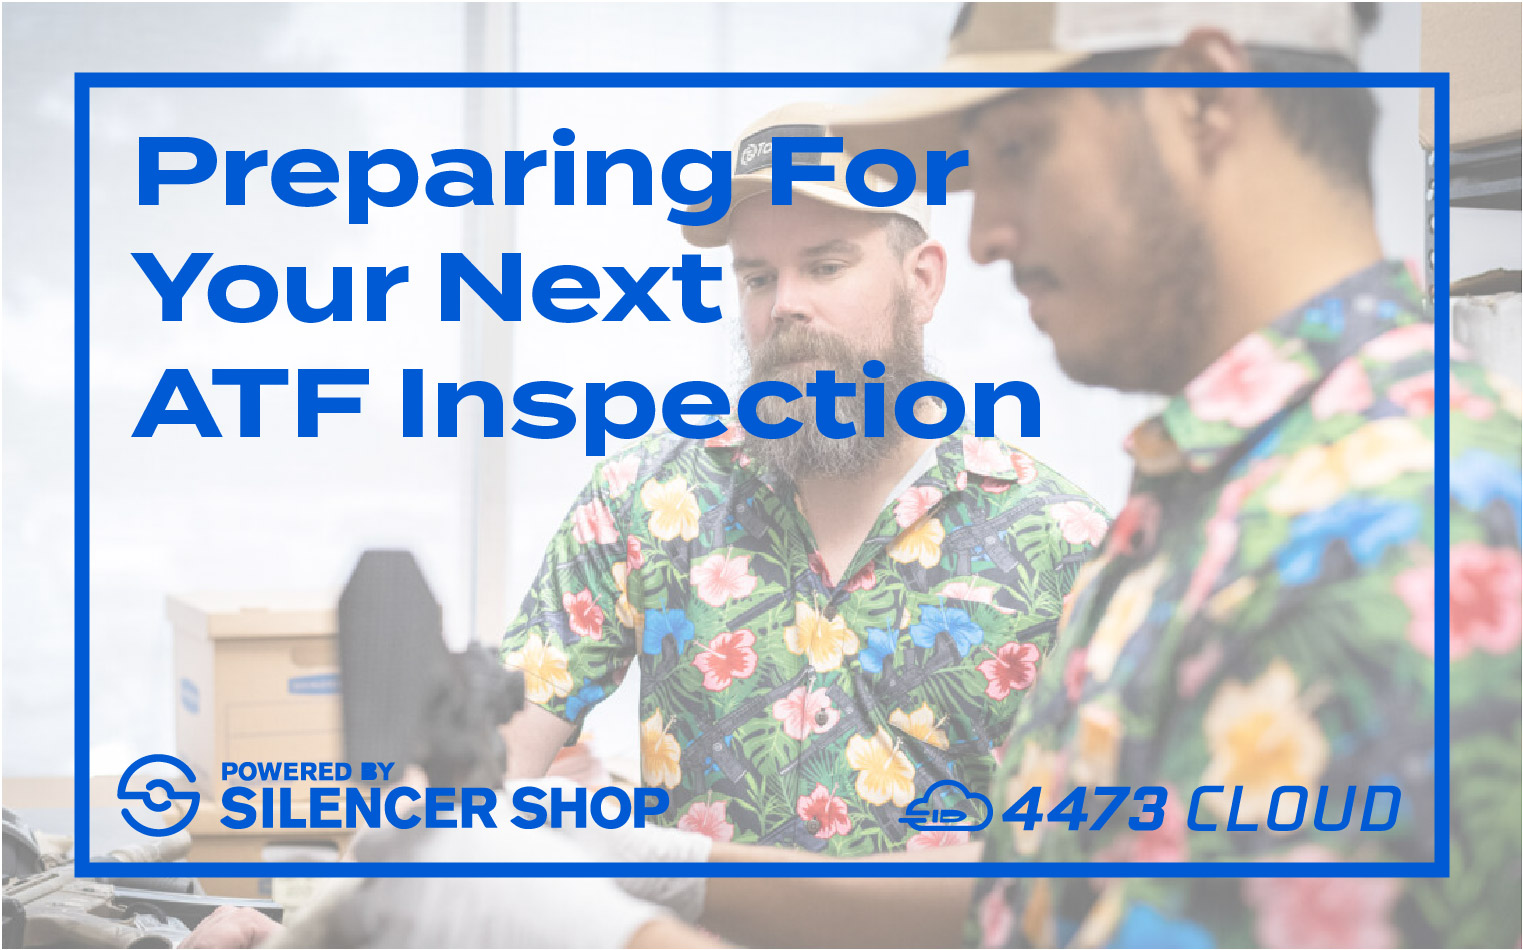 Preparing for your next ATF inspection